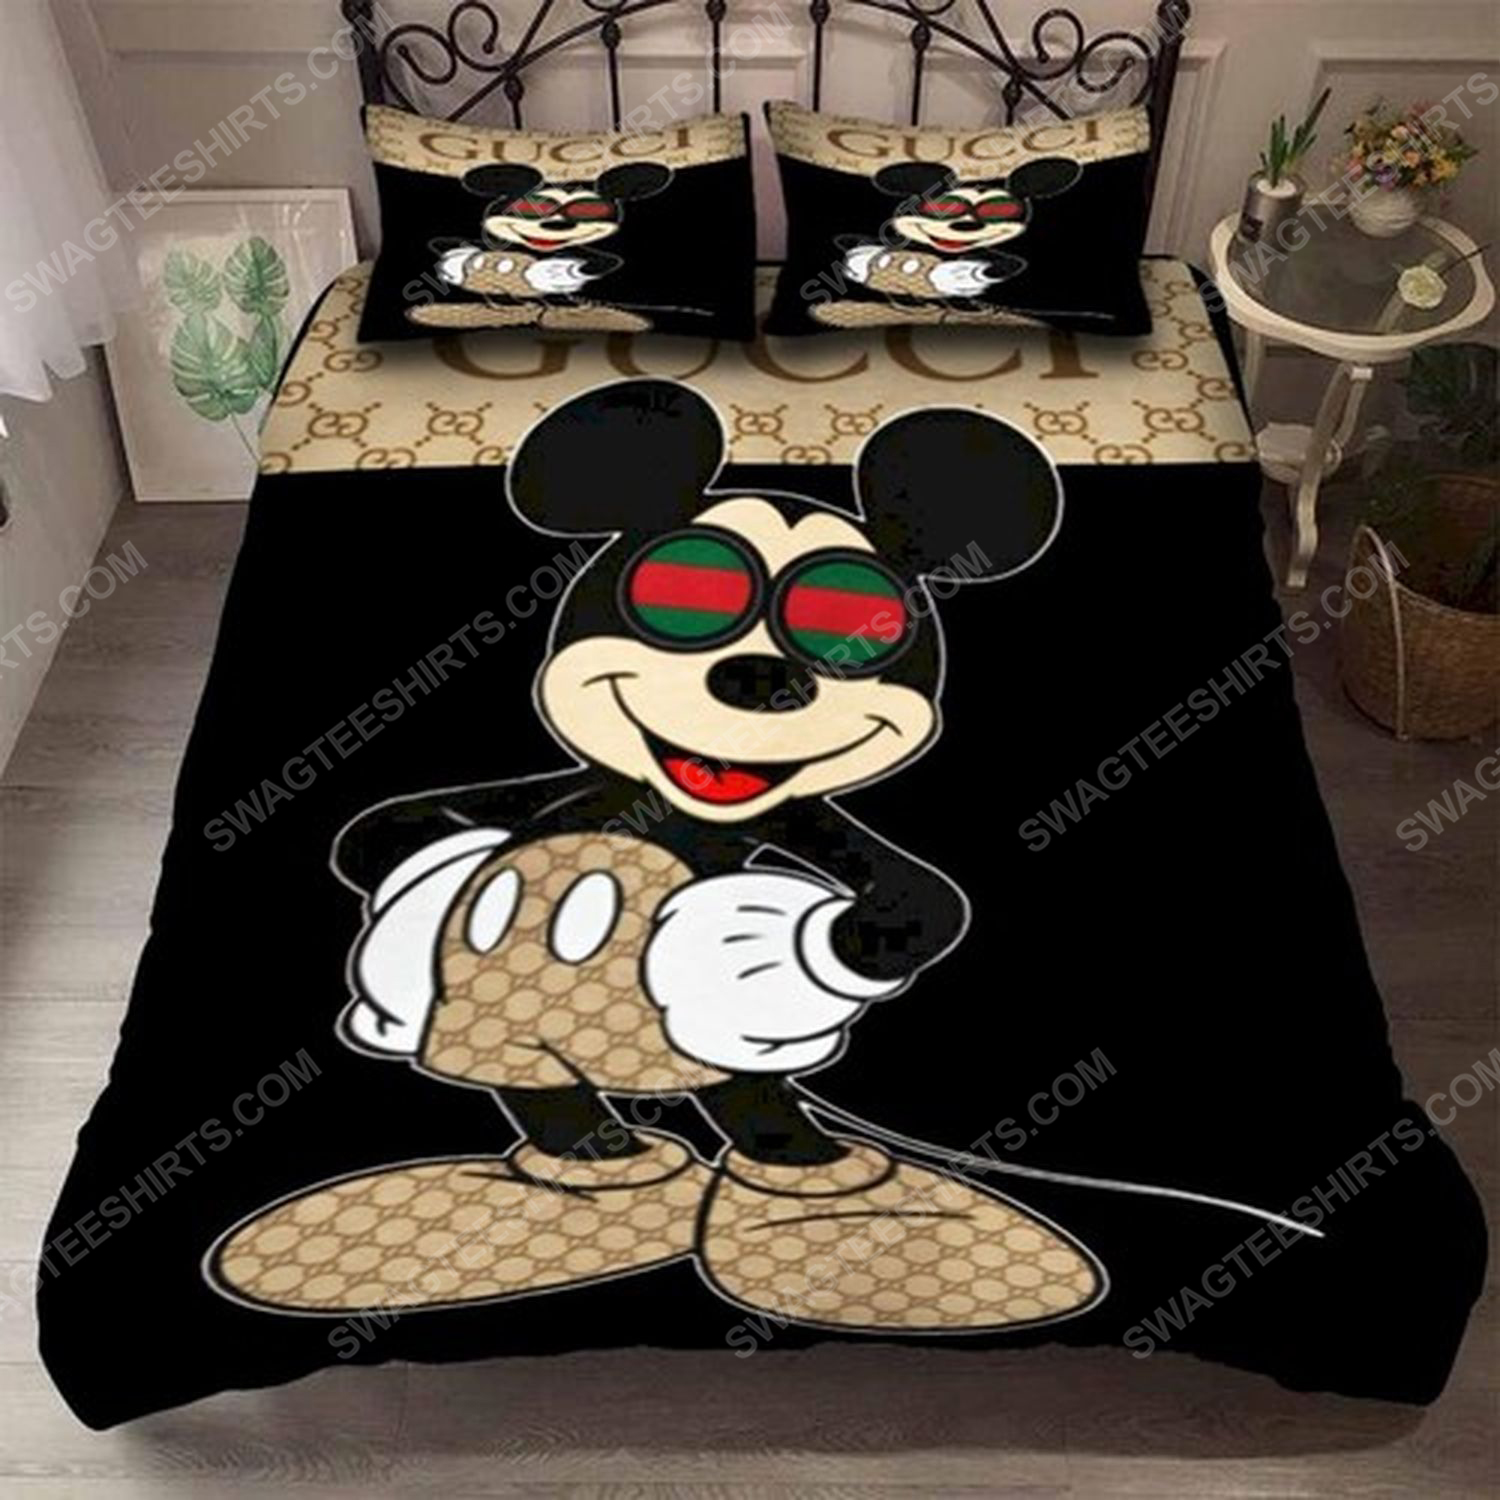 Gucci and mickey mouse full print duvet cover bedding set 2 - Copy